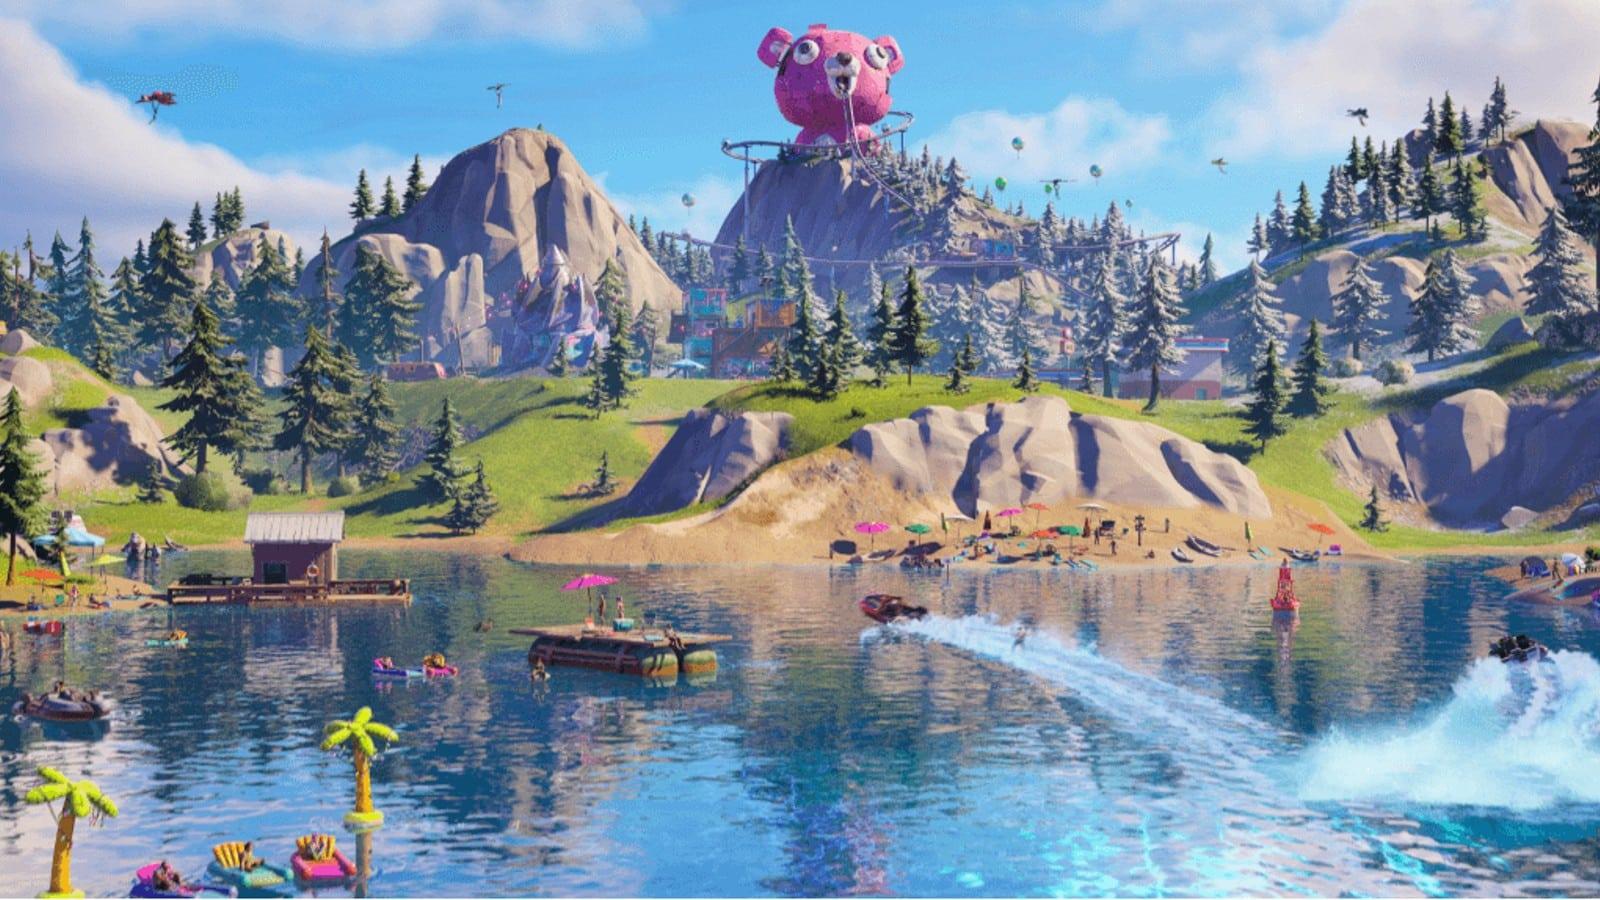 Fortnite teases possible collaborations.